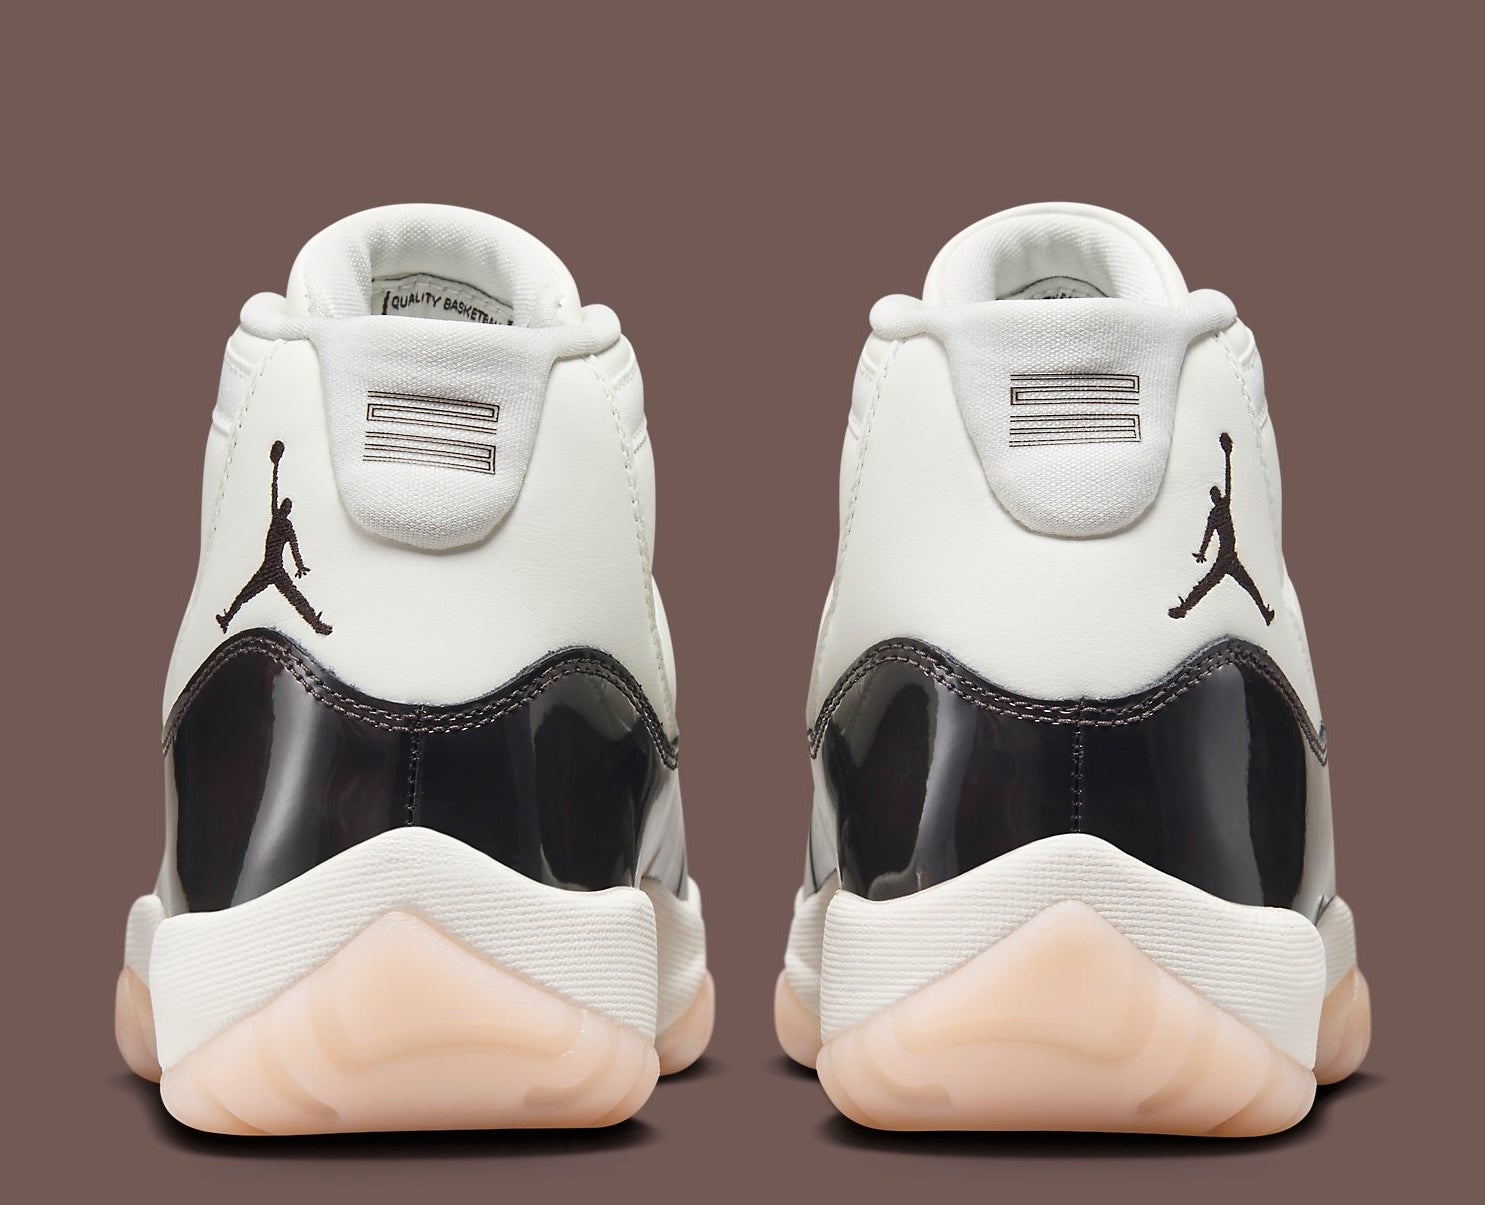 The Air Jordan 11 Gets Revealed in a Delicious Neapolitan